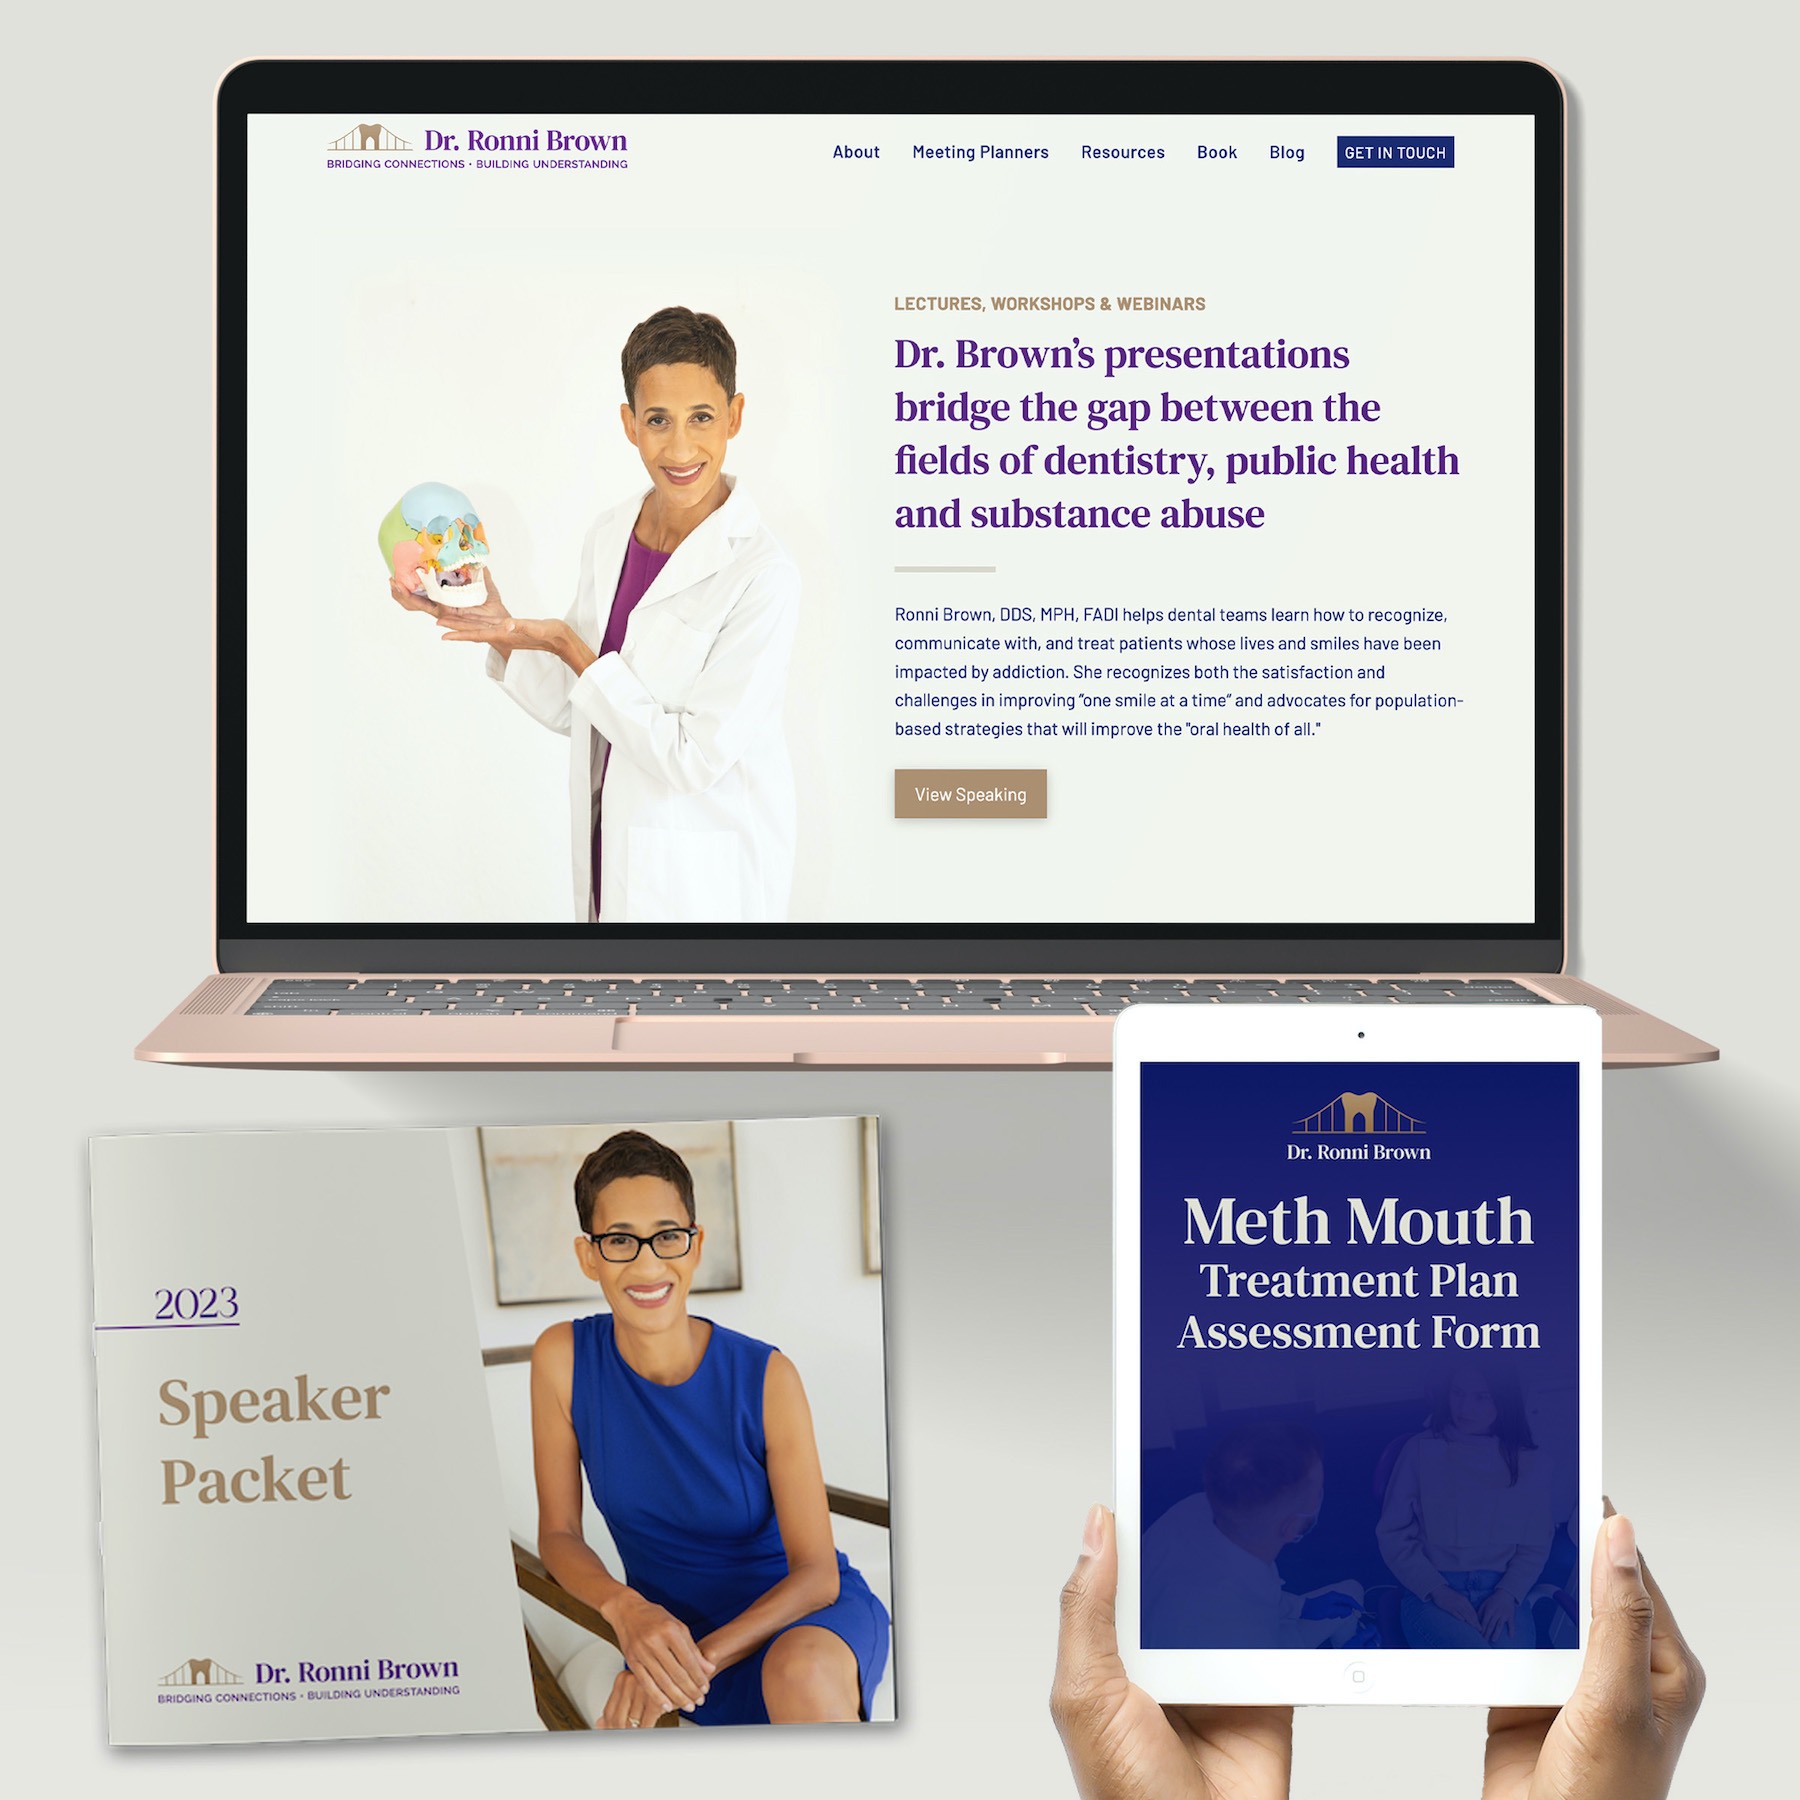 webdesign and graphic design marketing materials for dental speakers and doctors by Bhakti Creative Kulmala